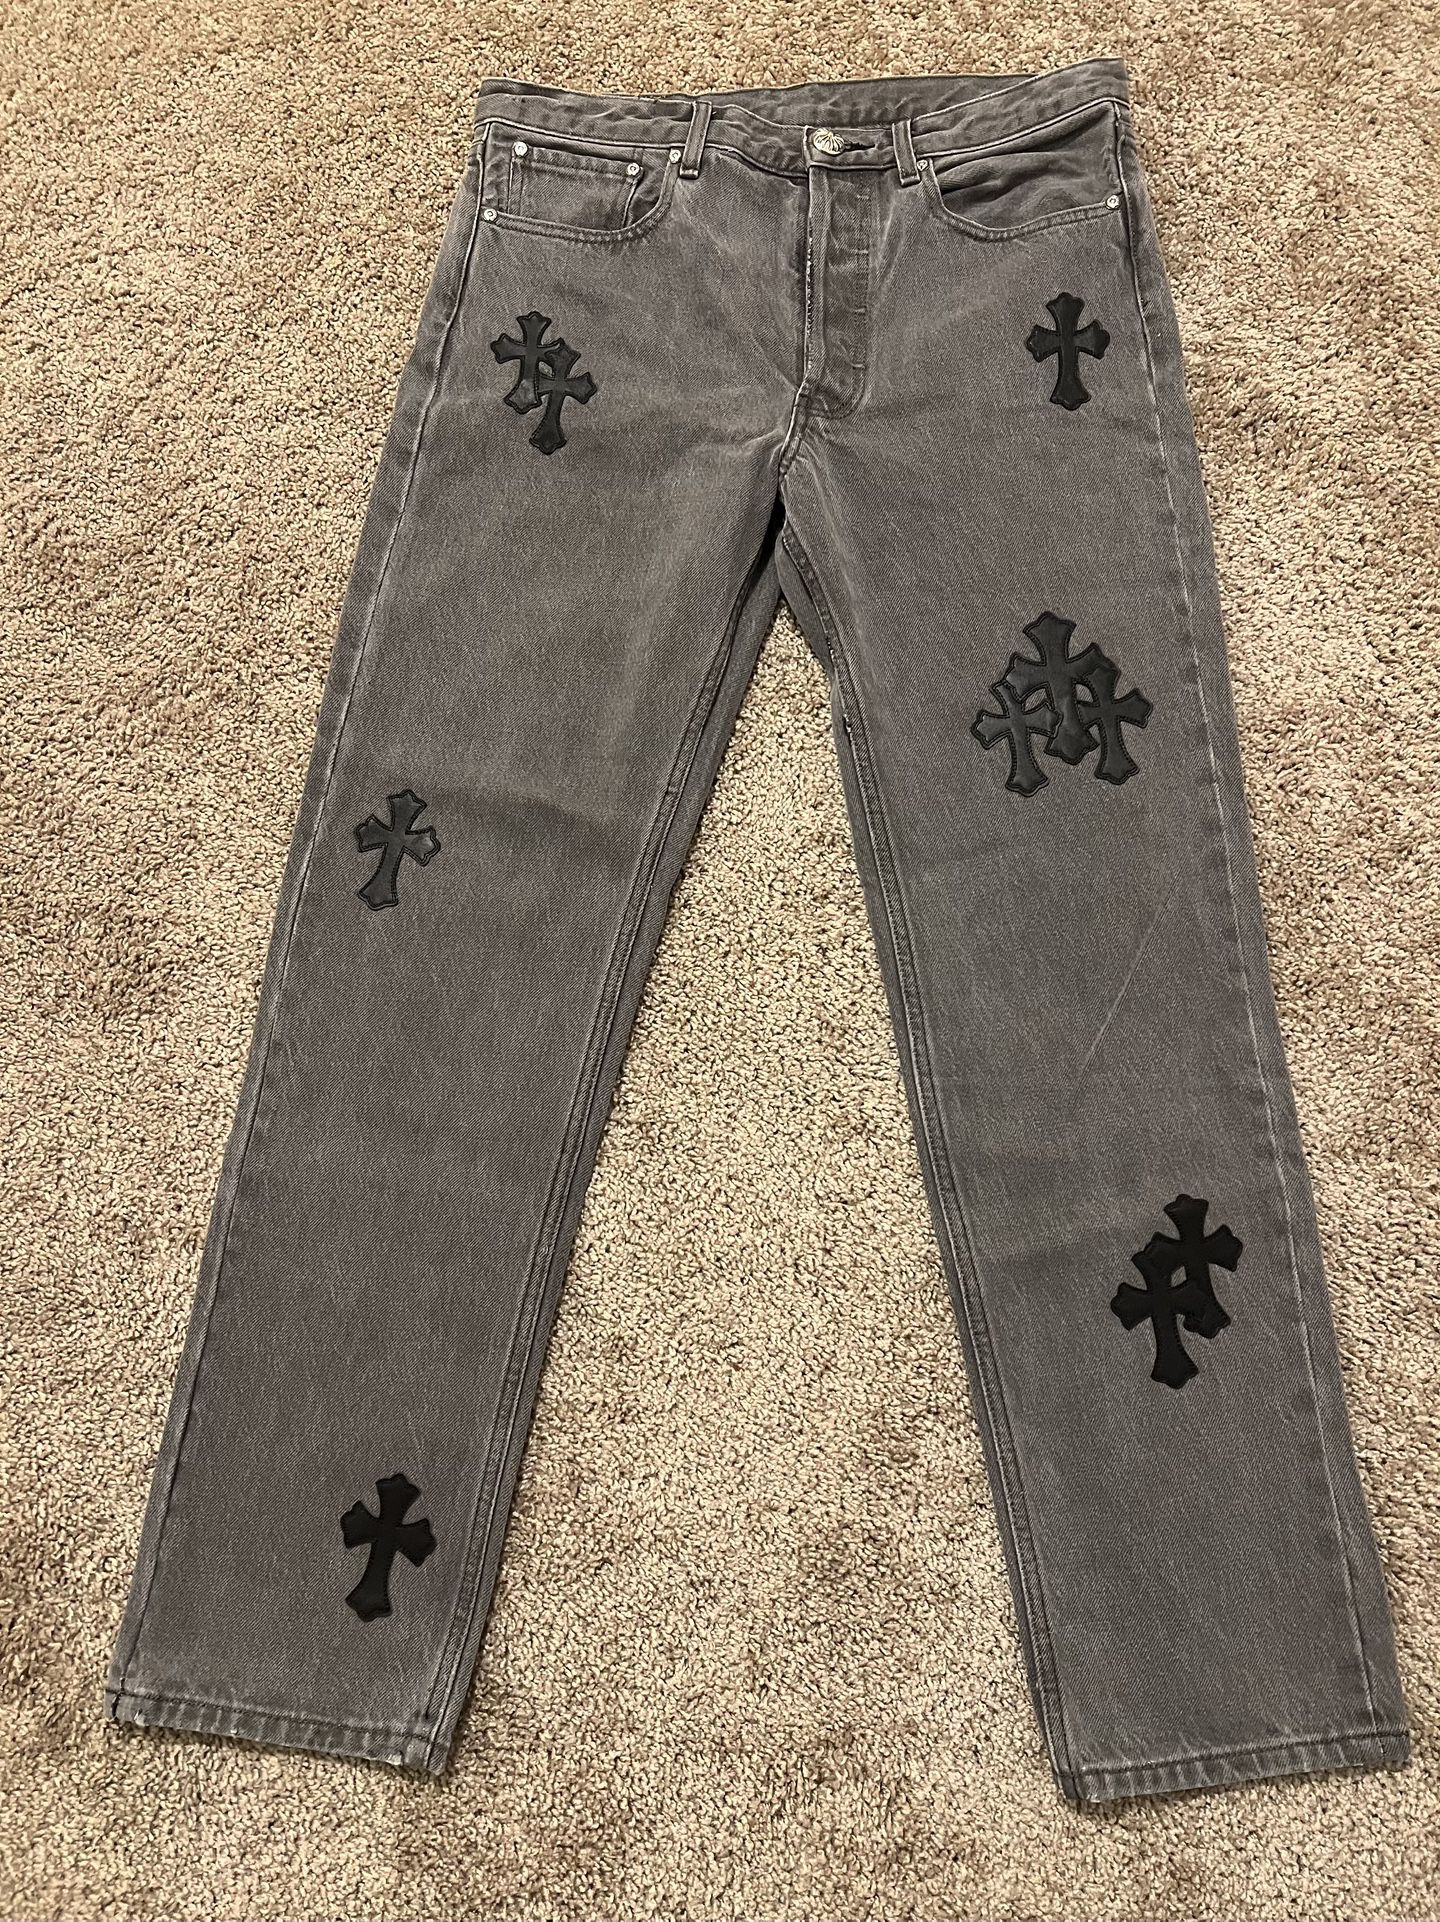 Chrome Hearts Jeans Levi’s Black Cross Leather Patch Rare Size 30 for Sale  in El Segundo, CA - OfferUp